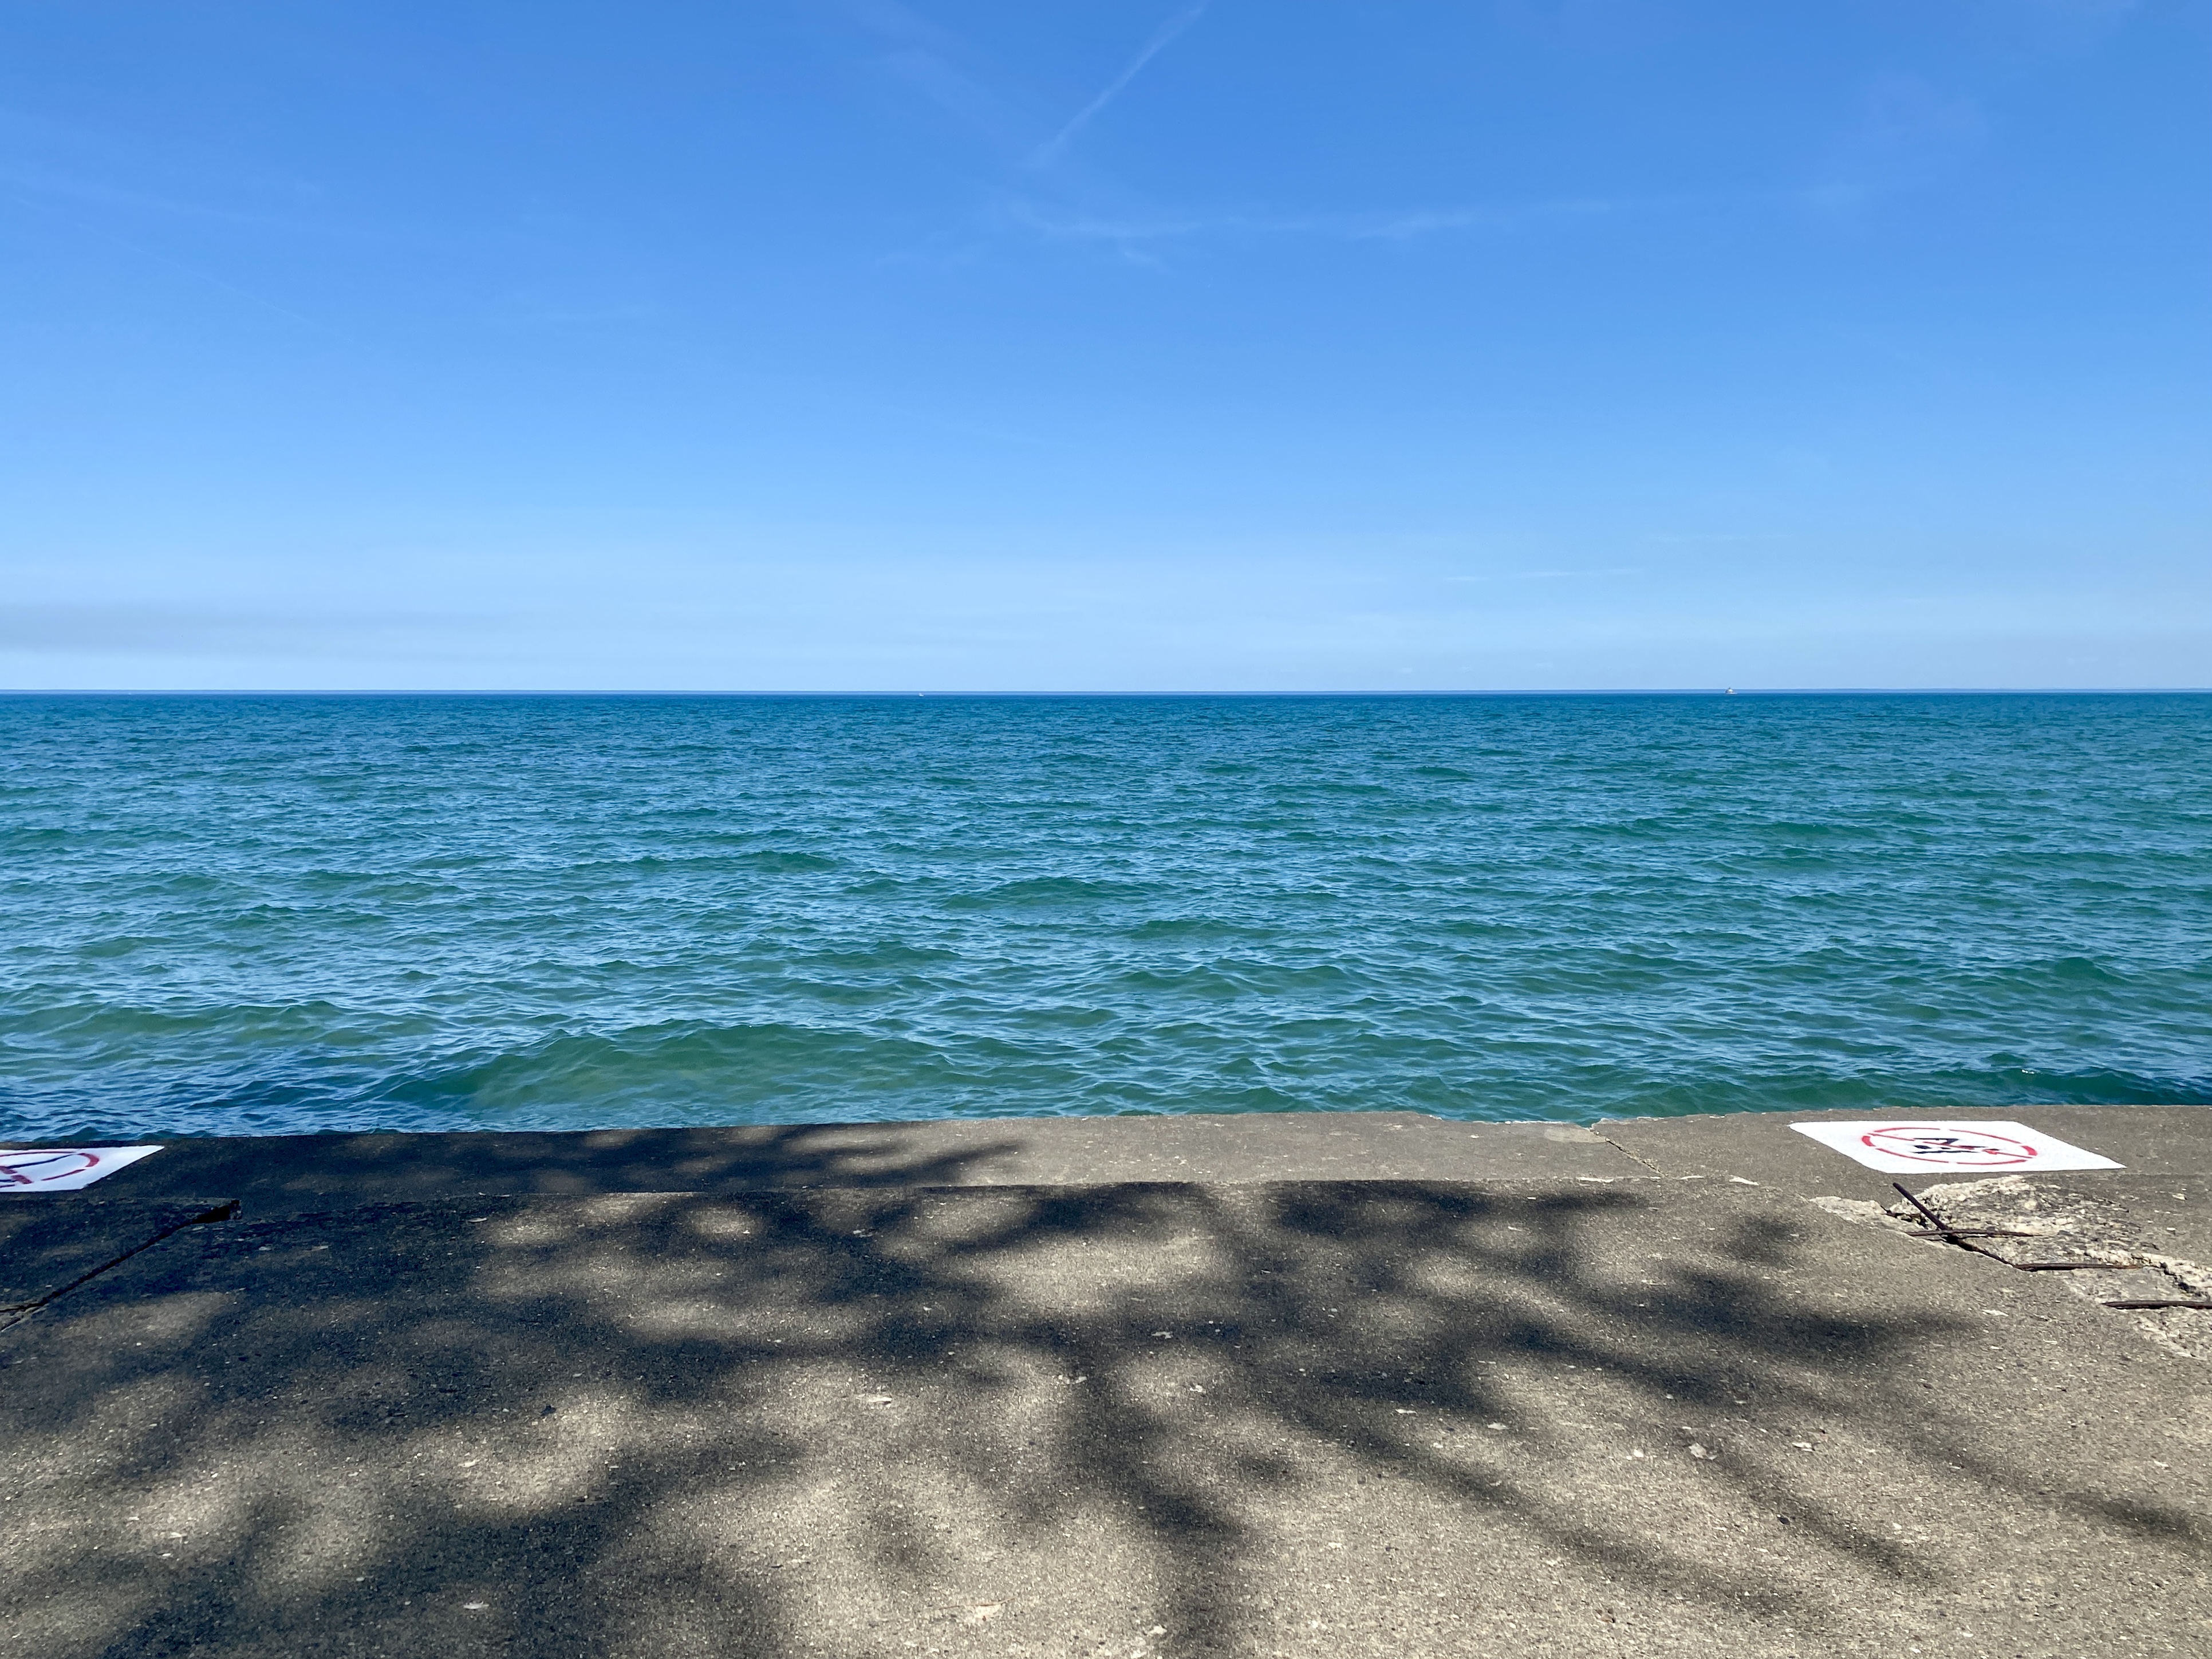 Horizon of large Lake Michigan with a deep, clear blue sky and turquoise-shaded water with small waves, a grey concrete shelf in the foreground